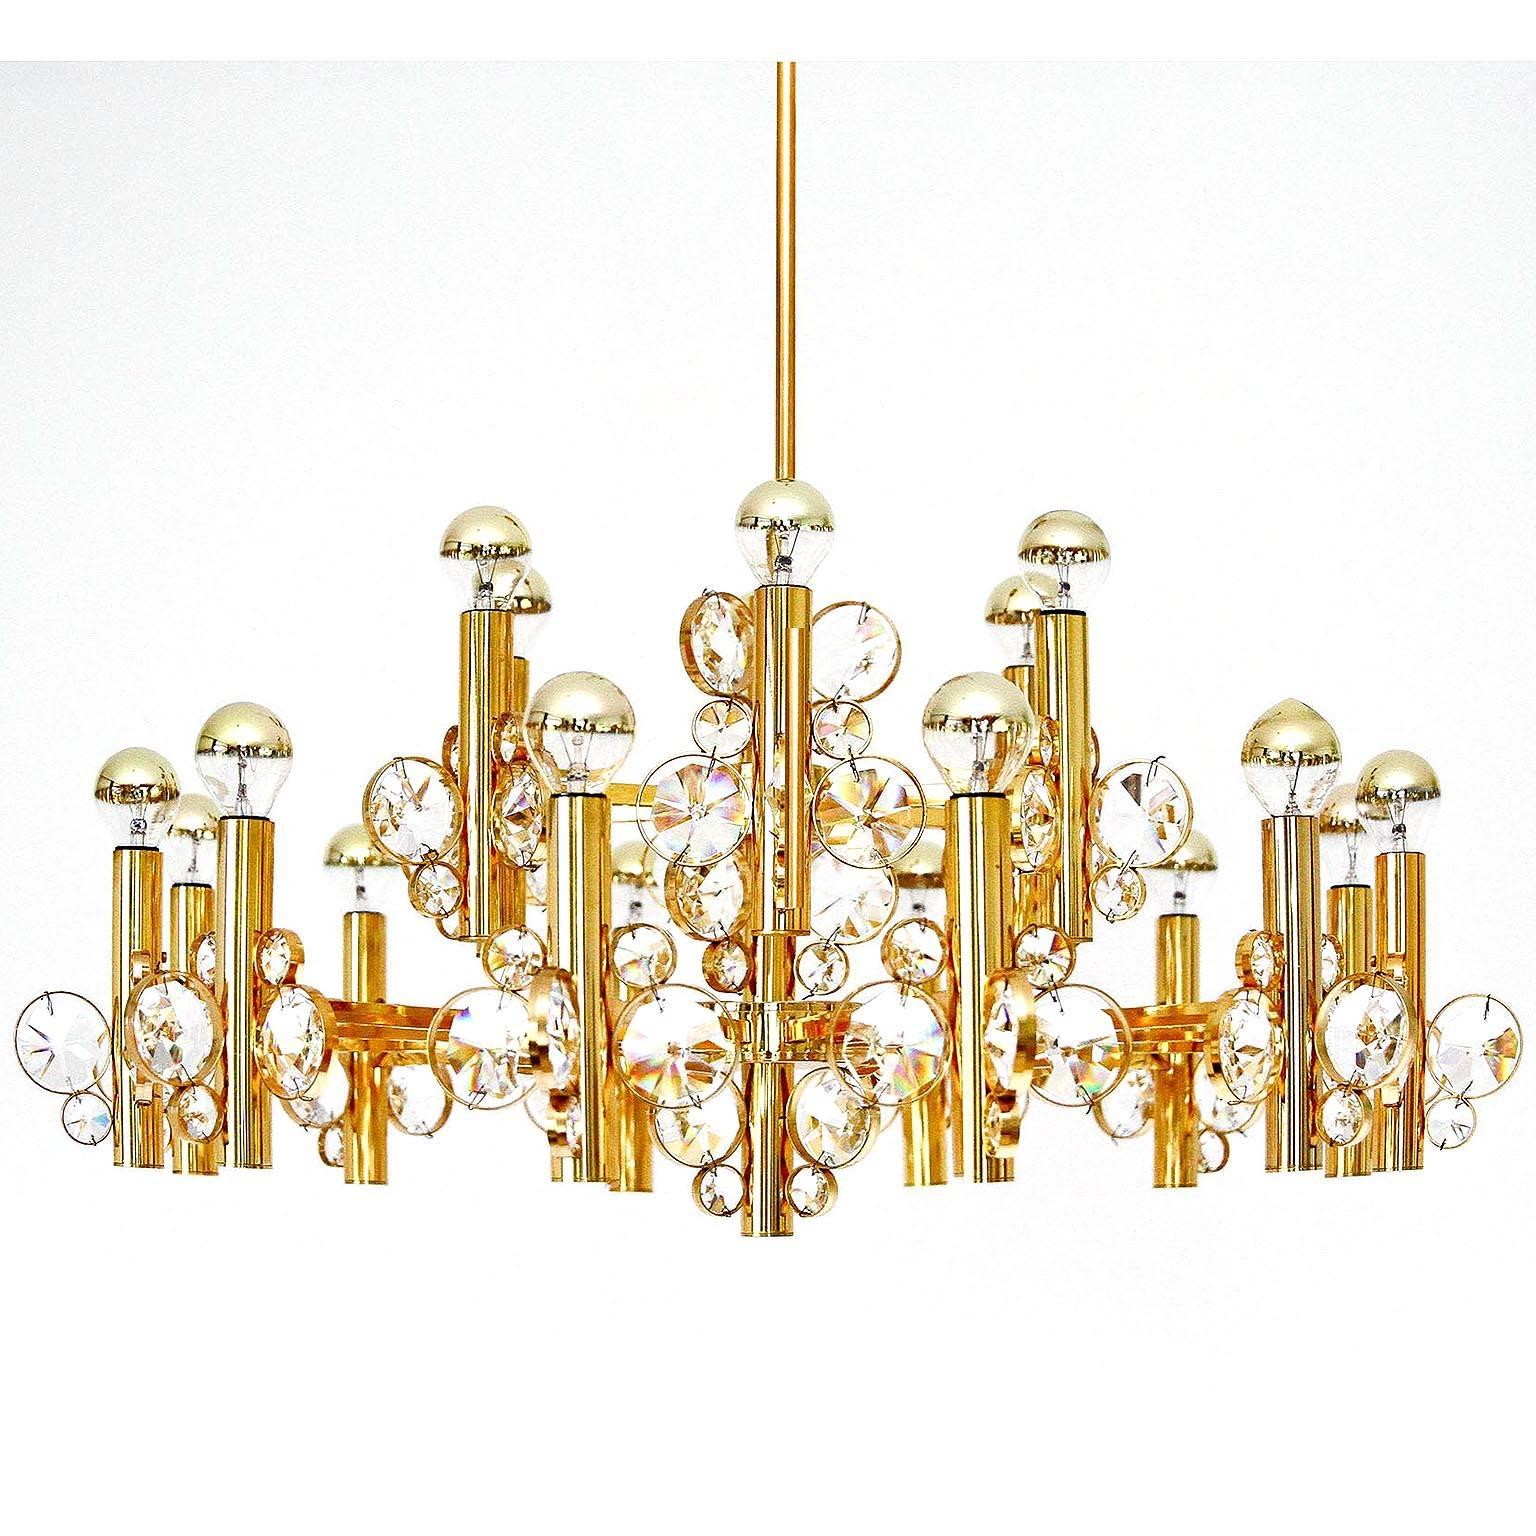 Very impressive eighteen-arm chandelier in the style of Bakalowits, Palwa or Sciolari, manufactured in Mid-Century (1960s - 1970s), ca. 1970. It is made of a gilded frame and diamond shaped crystals. 
The light has 18 sockets for small Edison screw